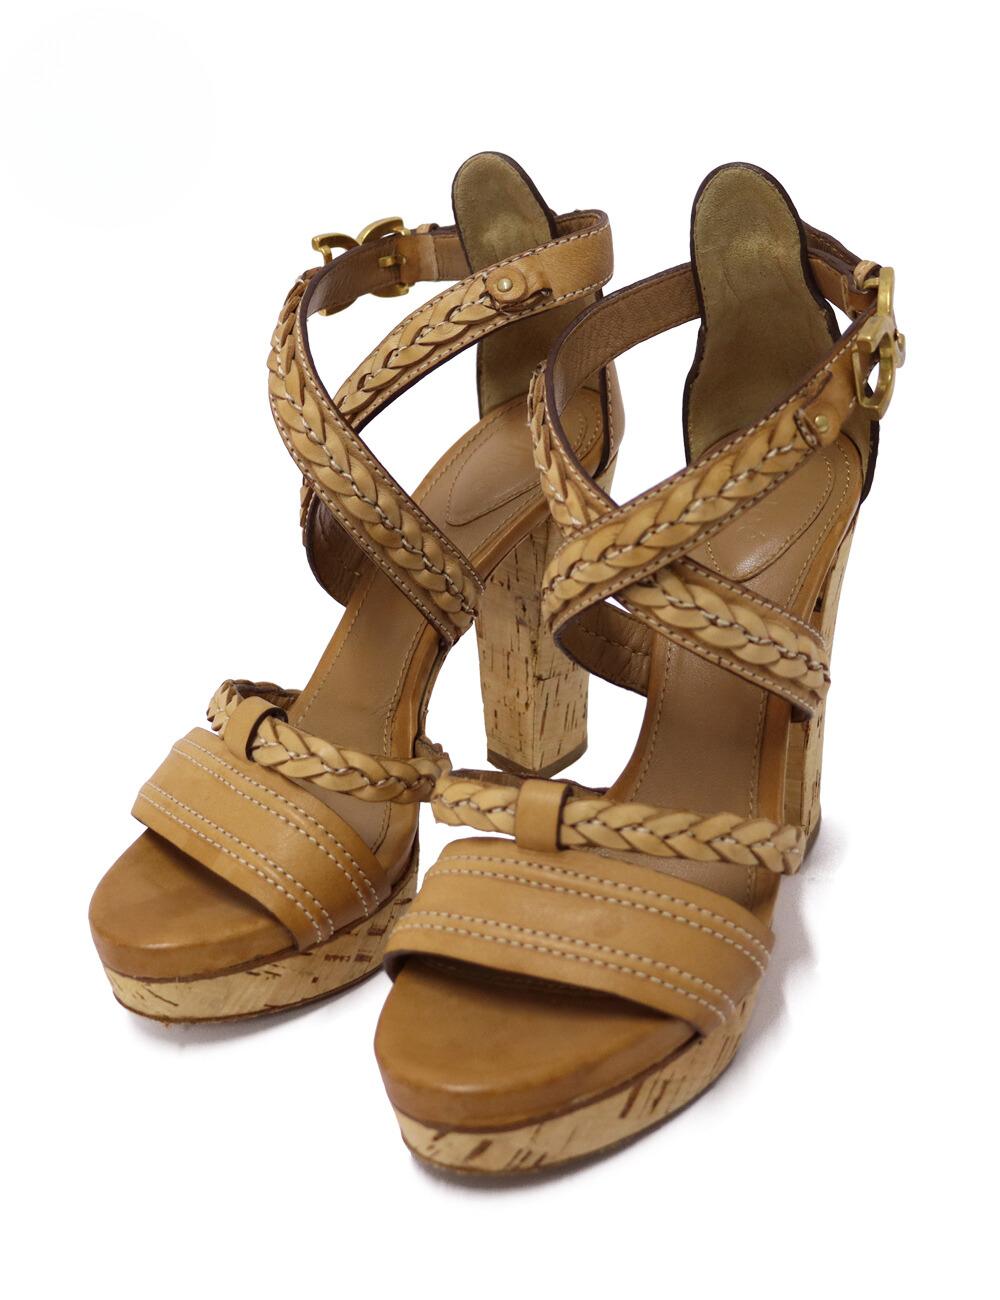 Chloé Tan Leather Braided Wooden Platform Sandals.

Material: Leather 
Heel Height: 11cm
Platform Height: 2cm
Size: EU 37
Overall Condition: Good.
Interior Condition: Visible signs of wear.
Exterior Condition: Visible stains.